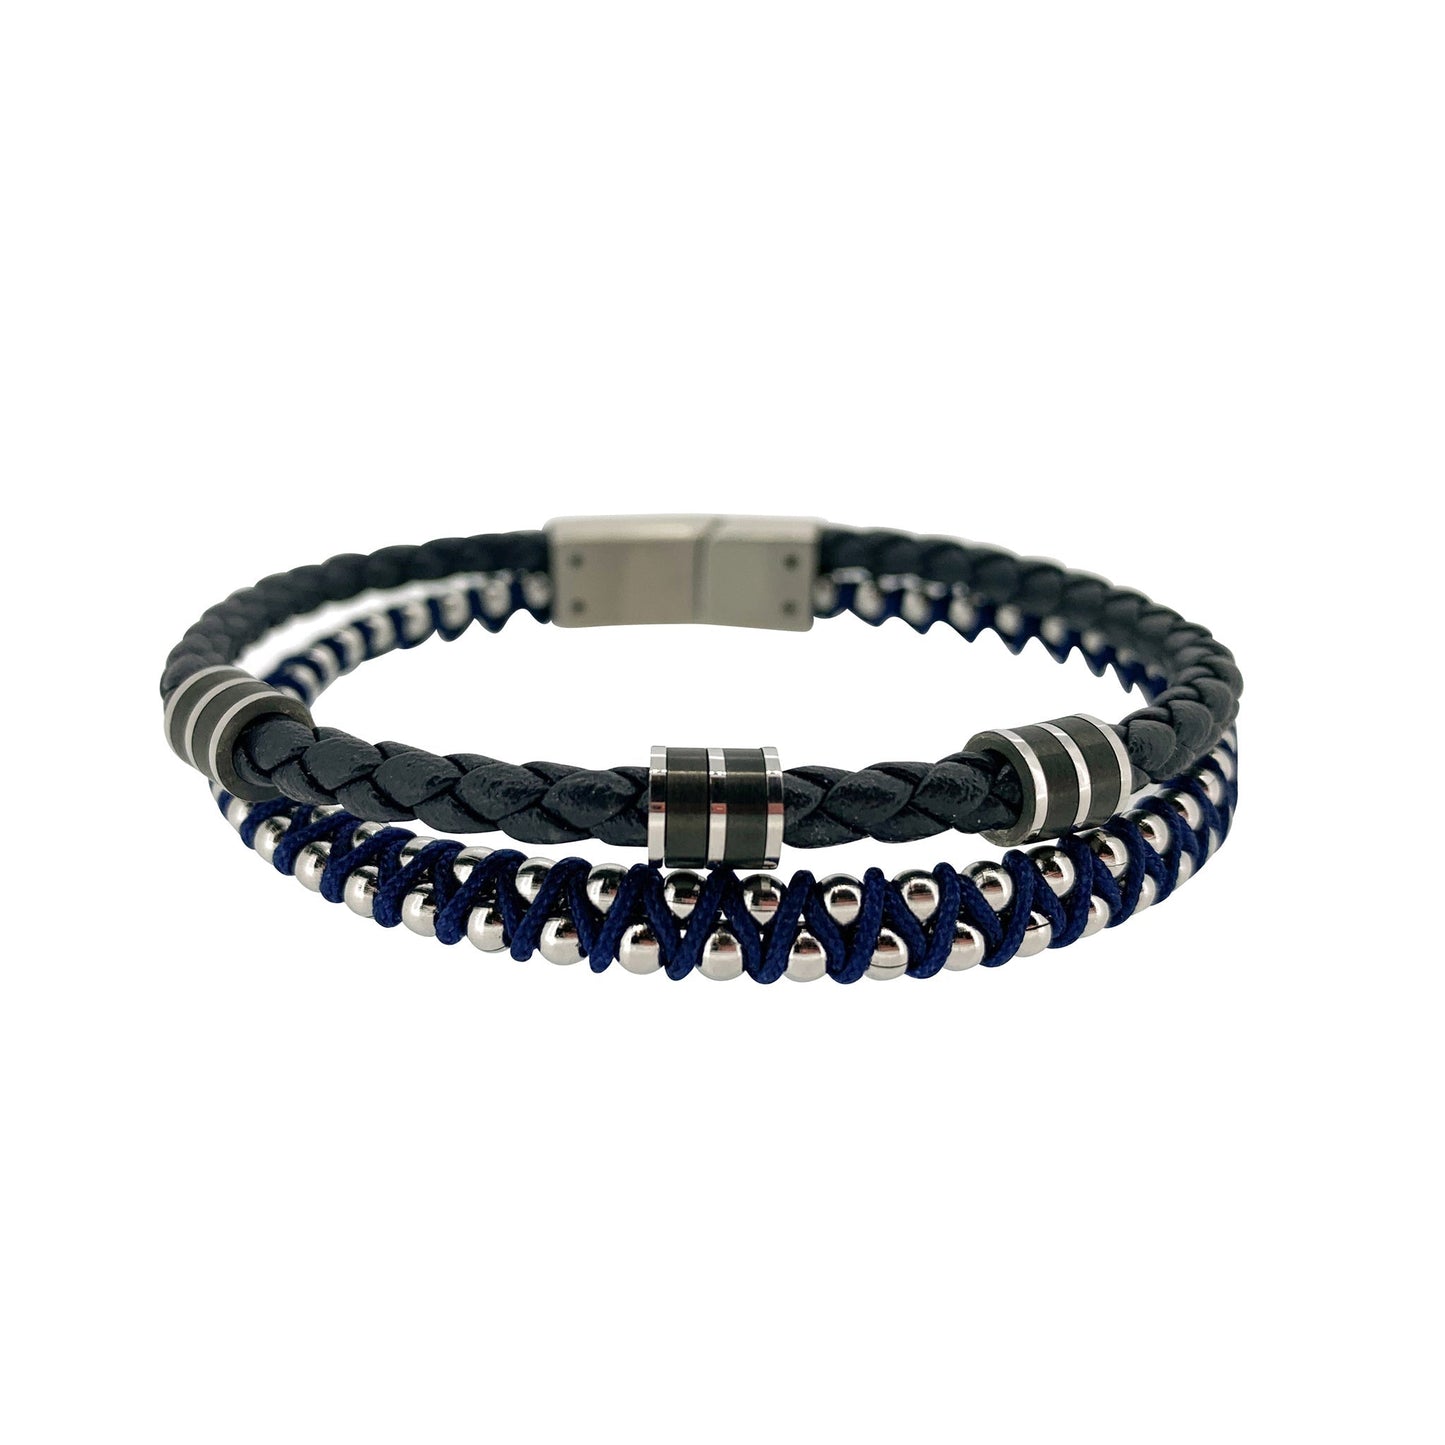 A navy blue leather 2 cord bracelet with stainless steel beading displayed on a neutral white background.